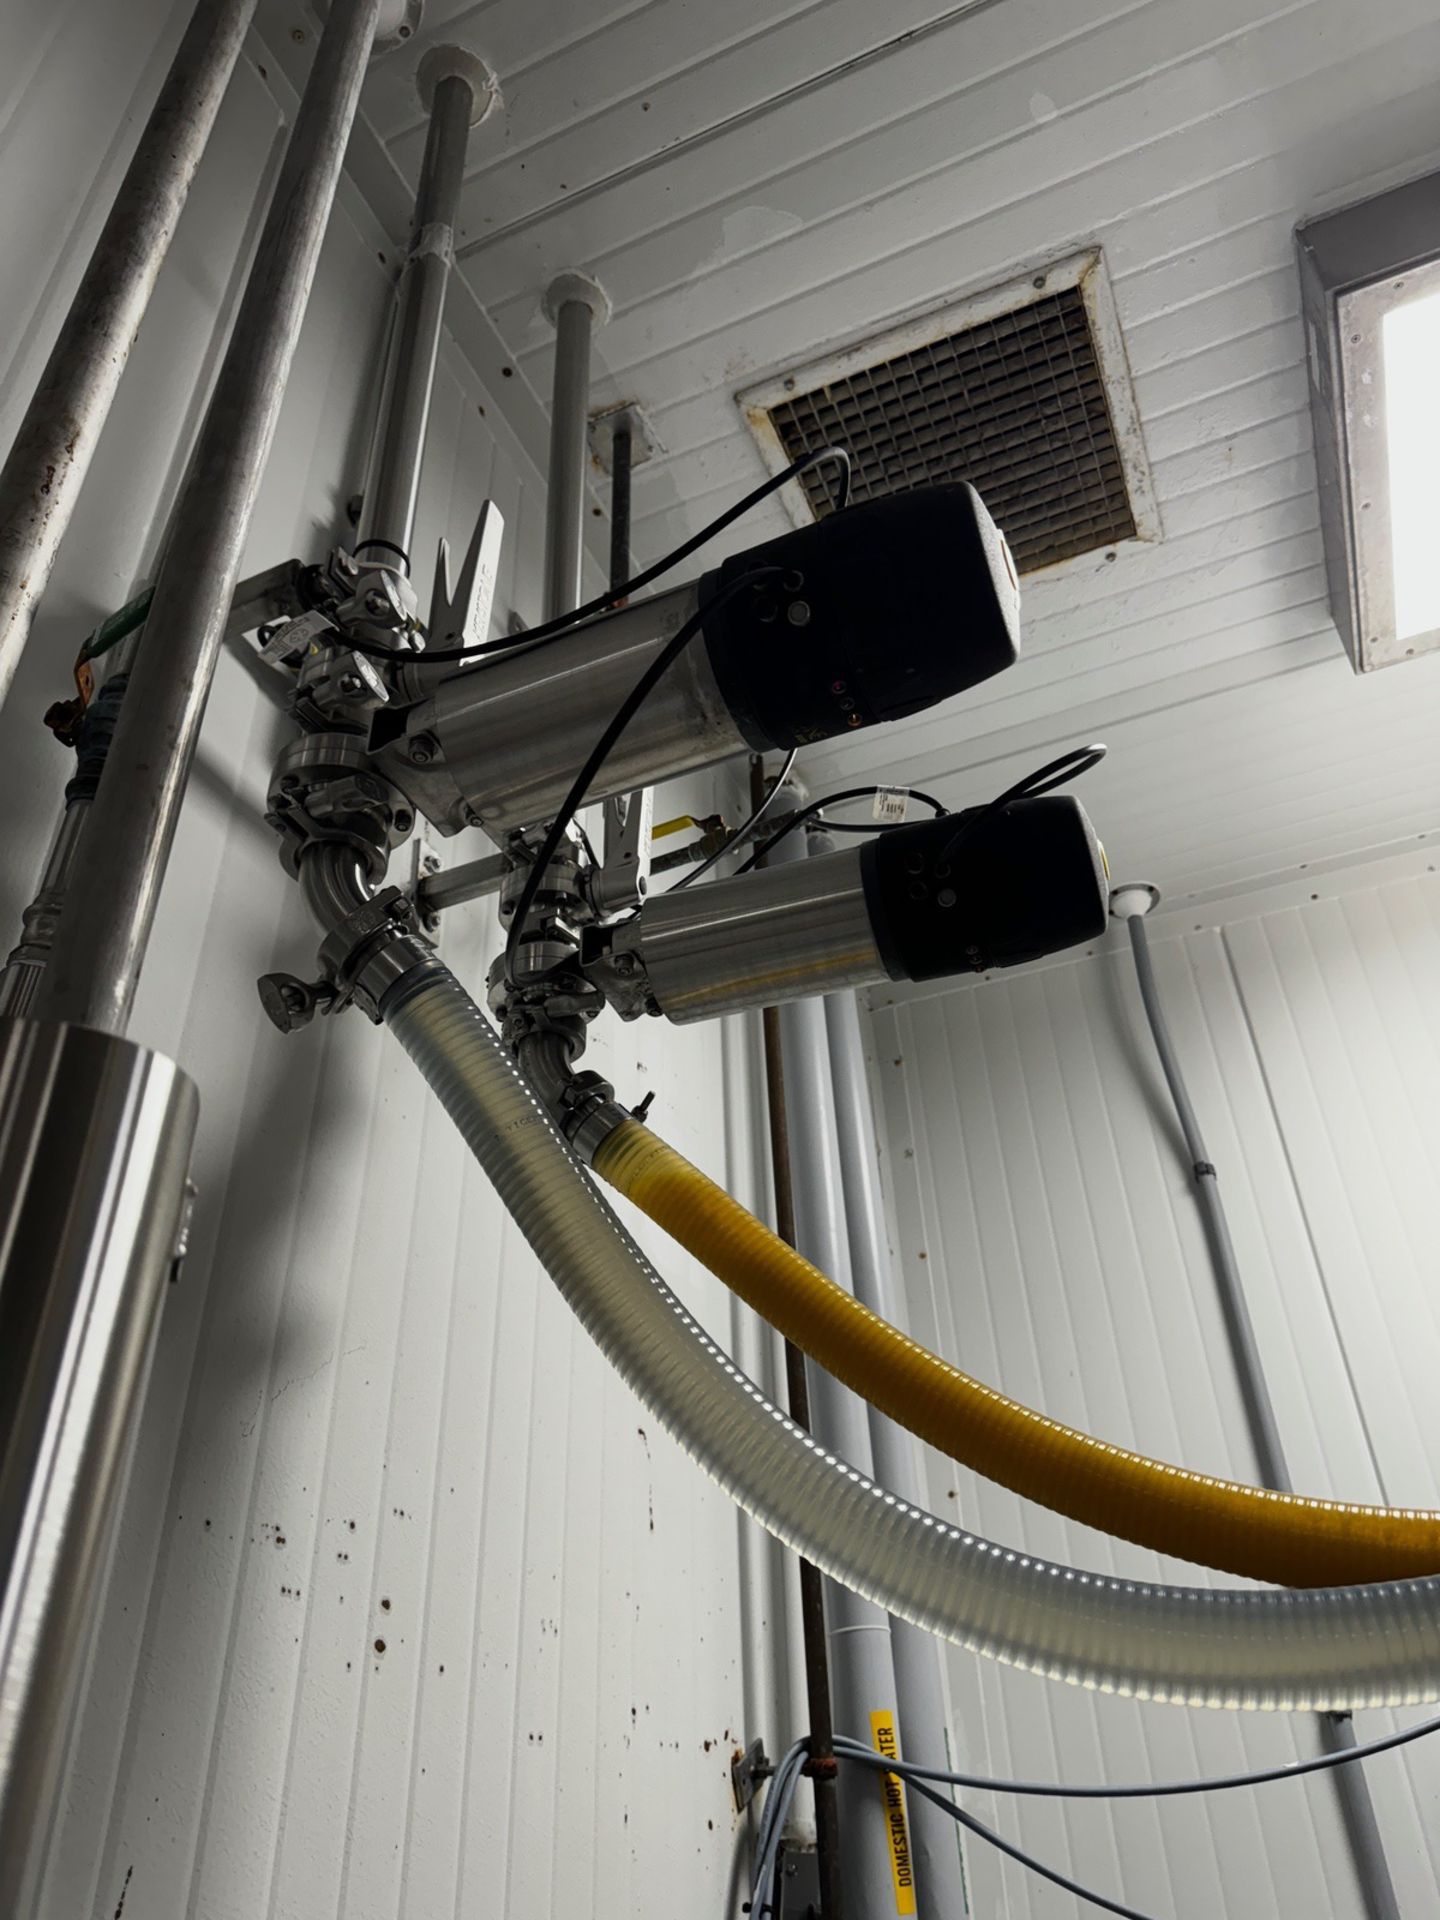 Balance of Valves and Stainless Piping in Pesto Production Room - Image 4 of 4